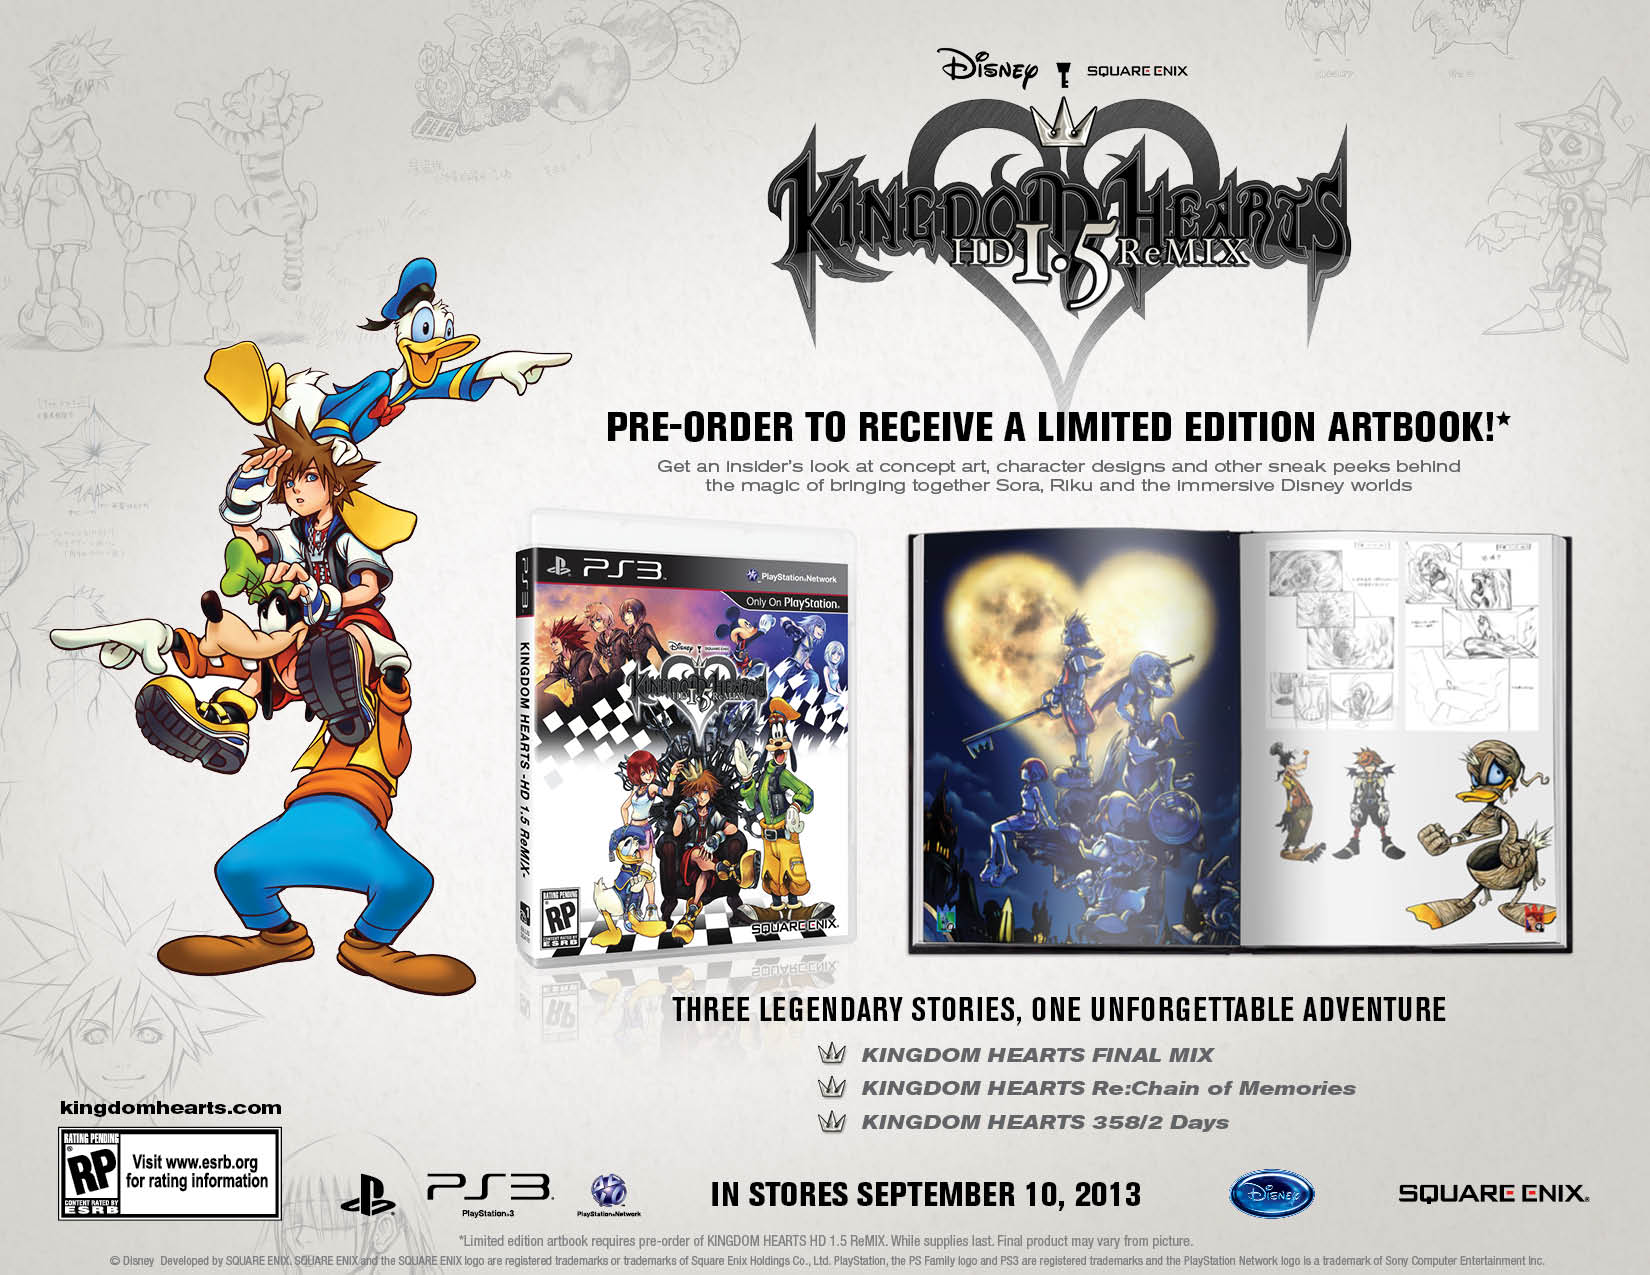 download kh 1.5 ost for free